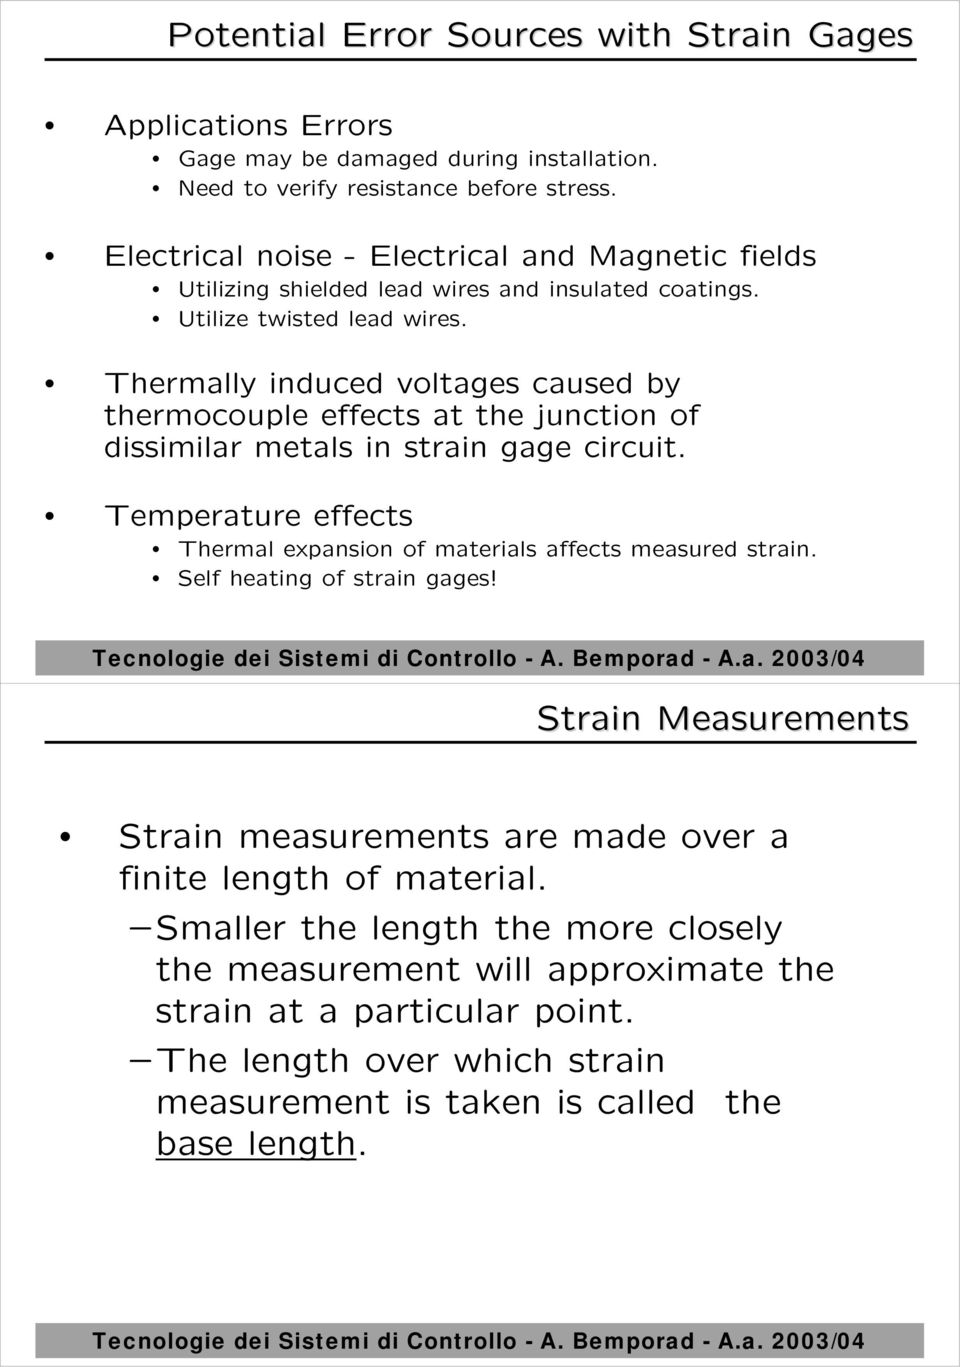 Thermally induced voltages caused by thermocouple effects at the junction of dissimilar metals in strain gage circuit.